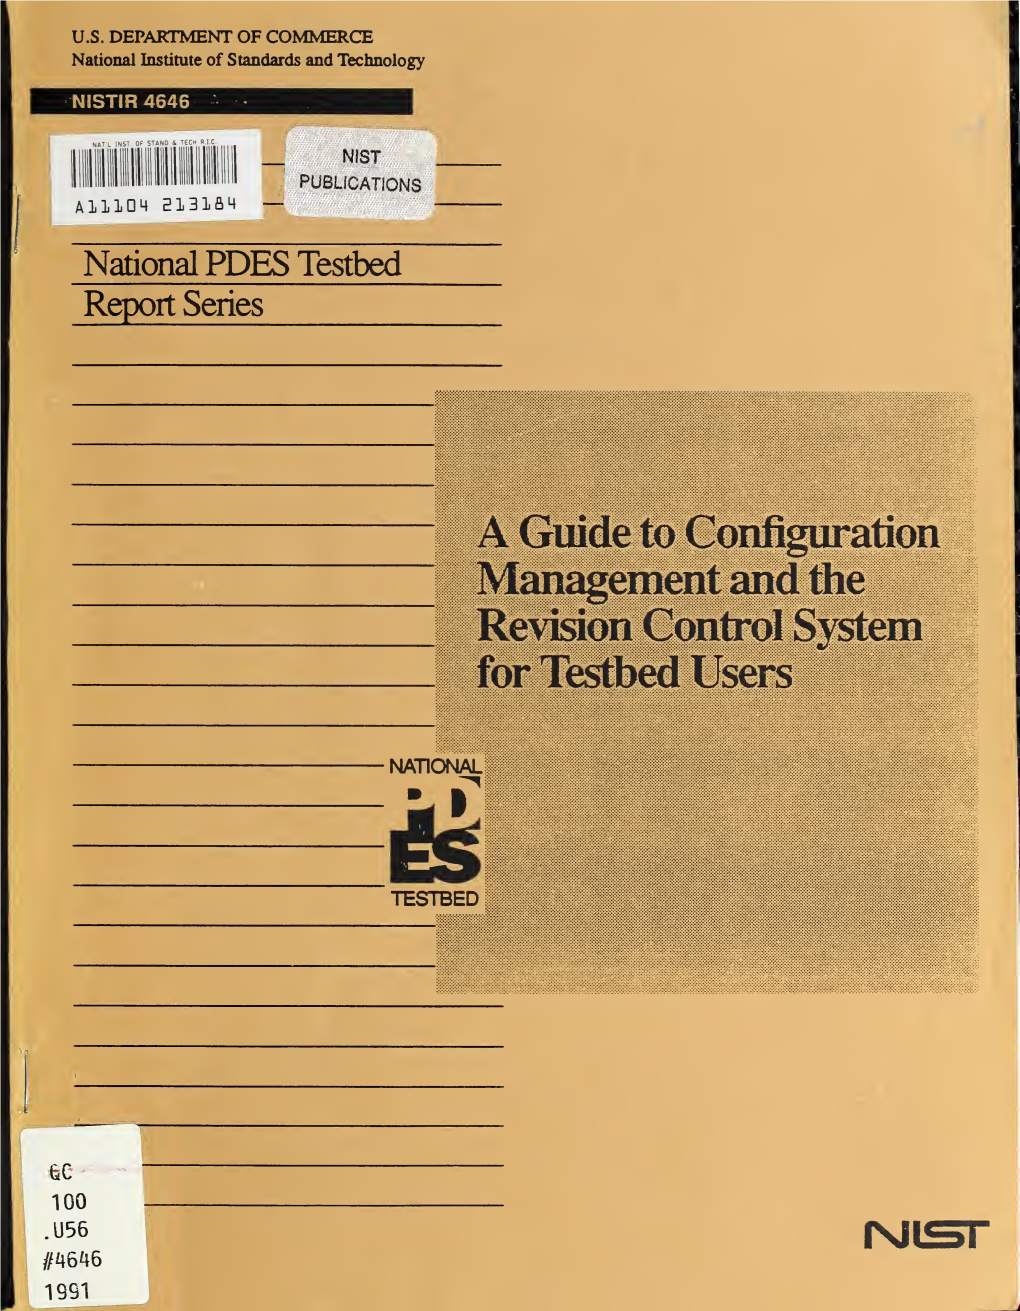 A Guide to Configuration Management and the Revision Control System for Testbed Users